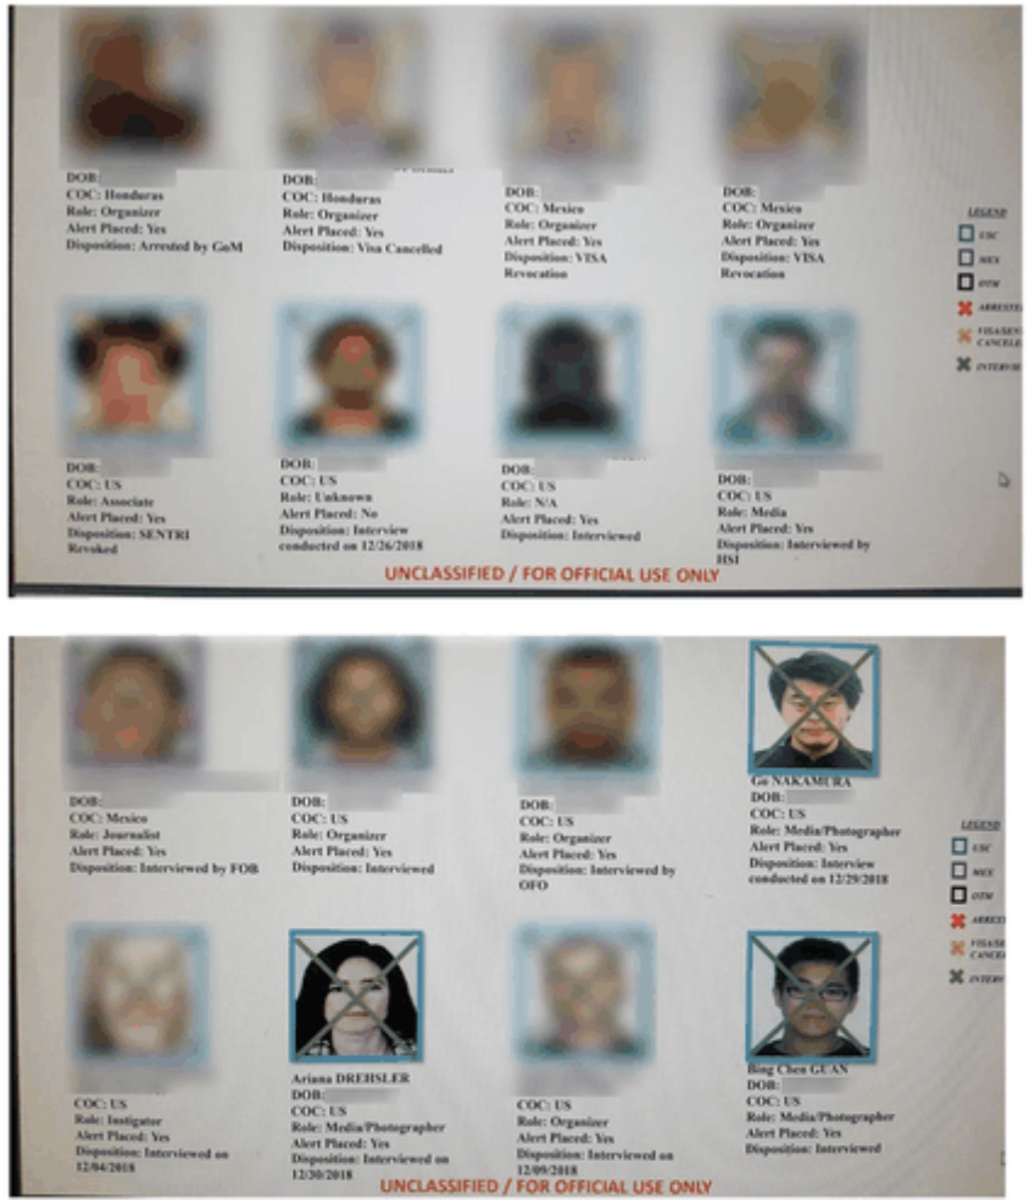 Screengrabs from the PowerPoint presentation a CBP official gave on Jan. 2019 to Mexican authorities listing journalists, activists and others they tied to the migrant caravan. The images are being used in a lawsuit filed by the American Civil Liberties Union (ACLU).